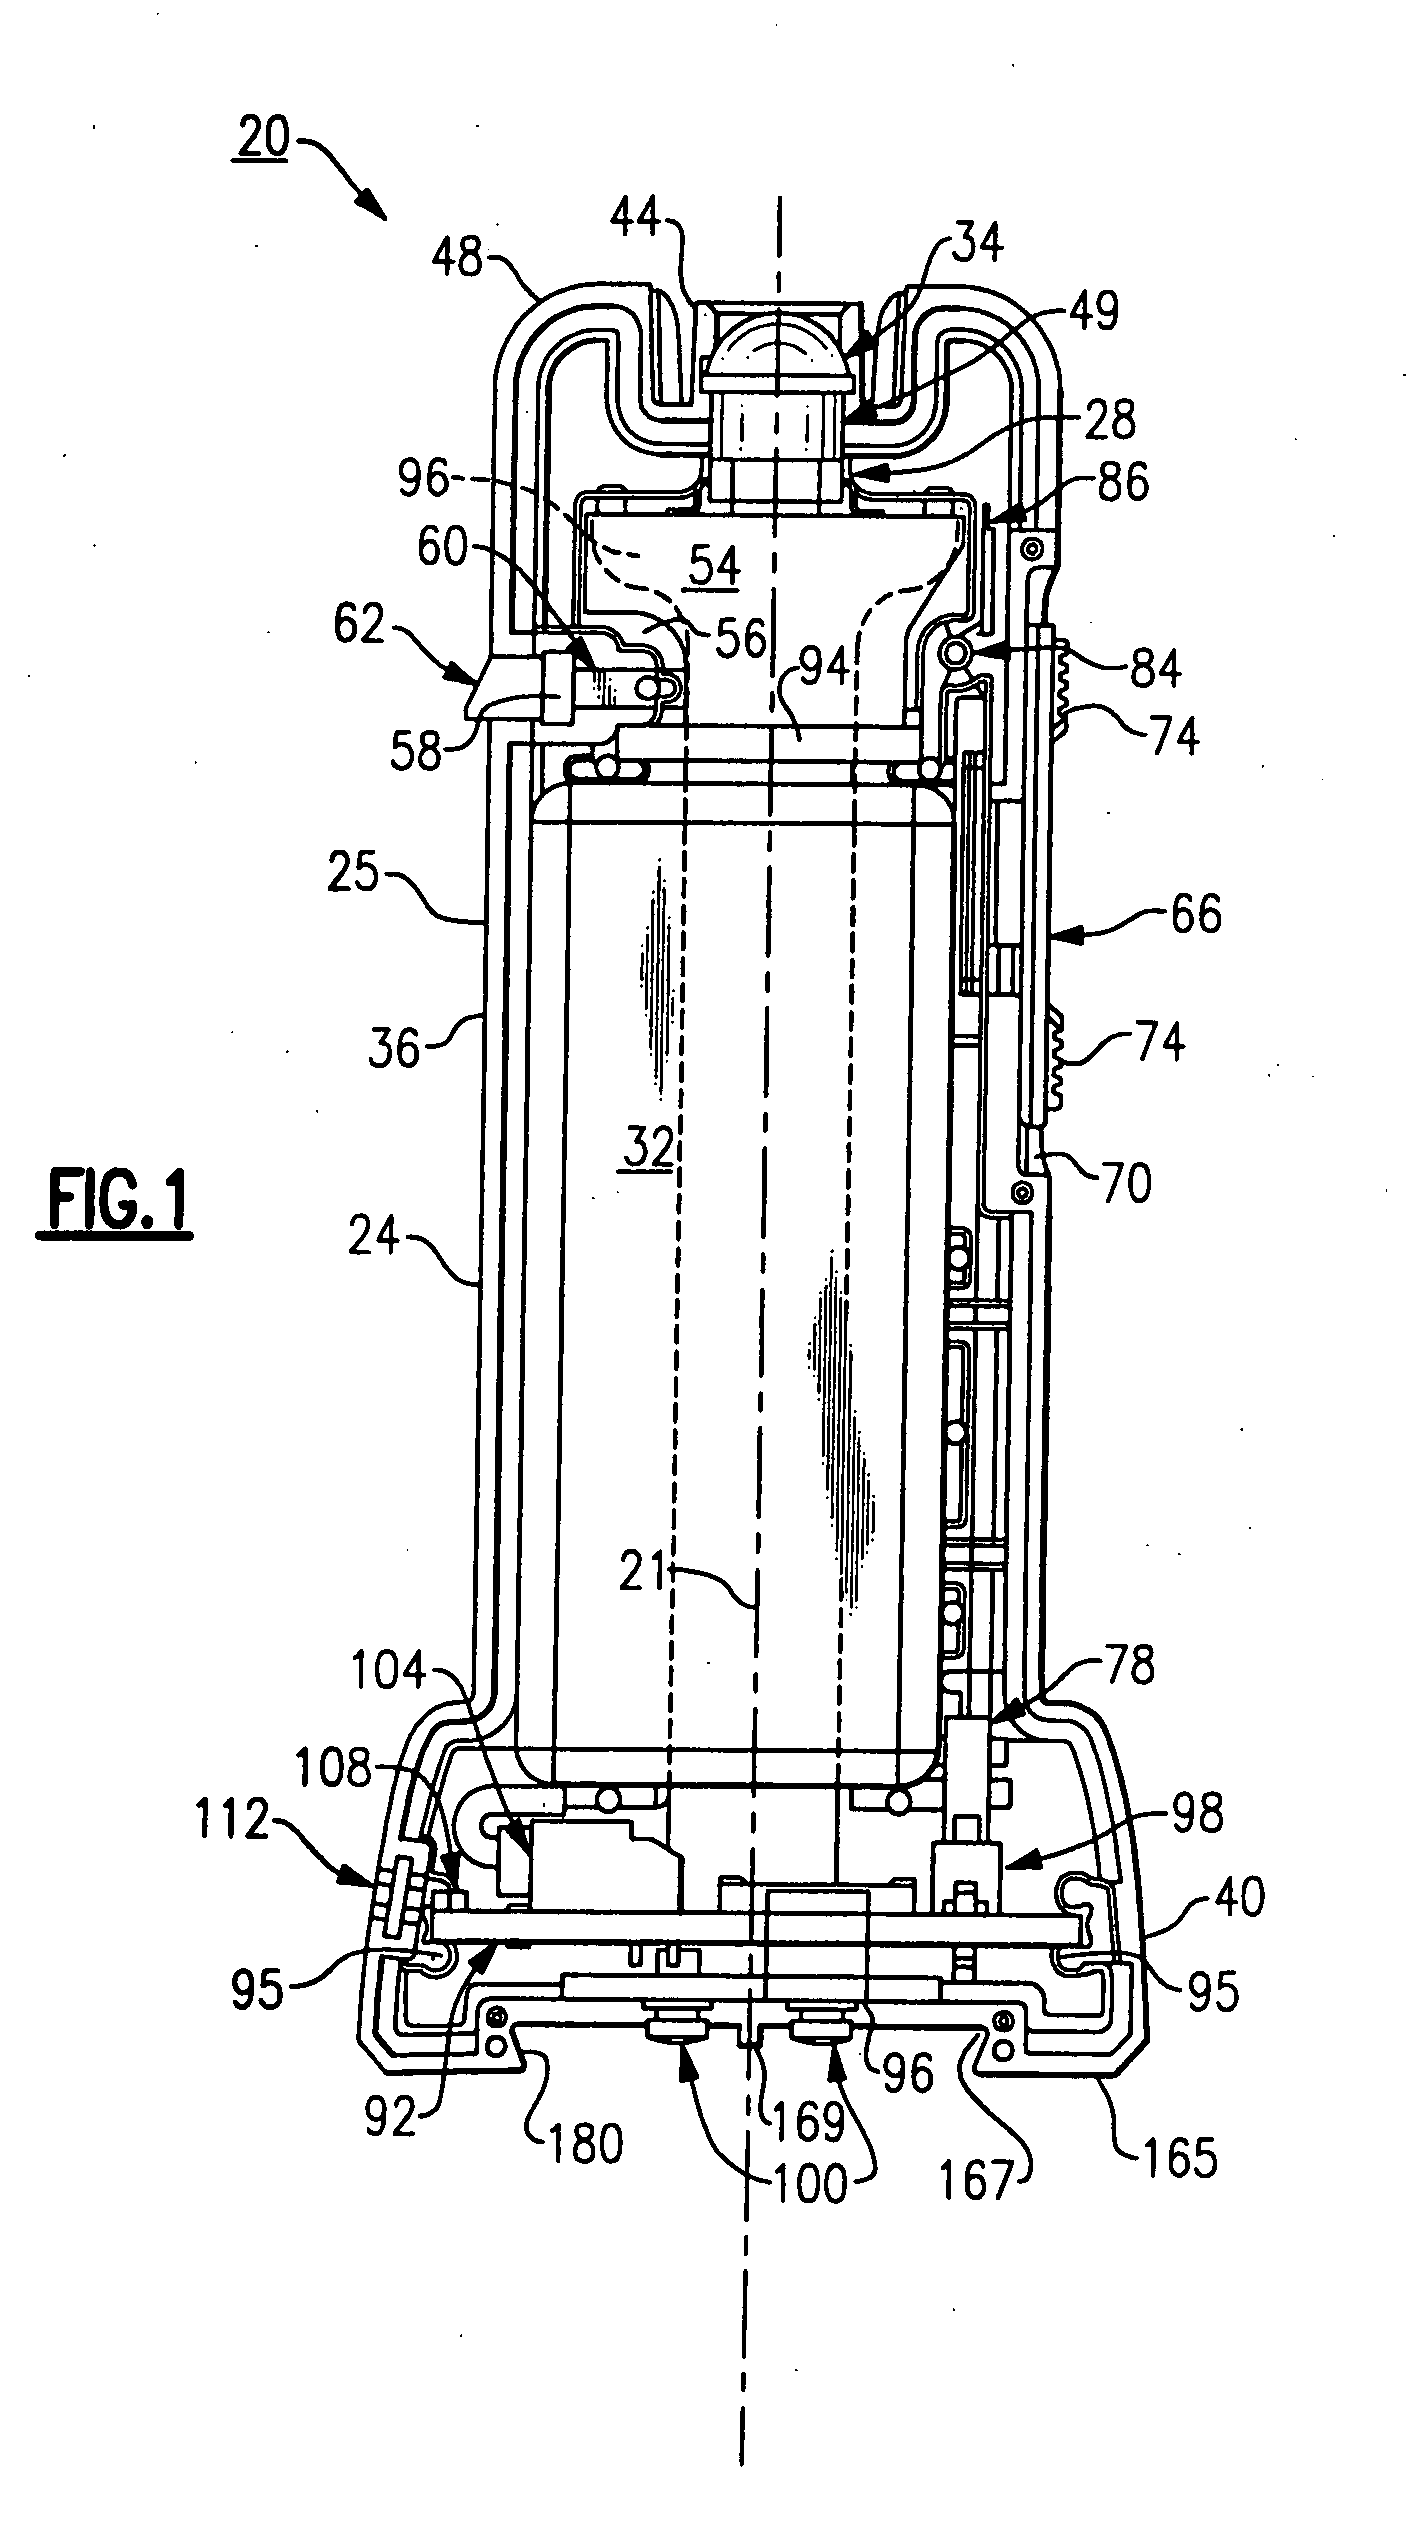 Power connections and interface for compact illuminator assembly